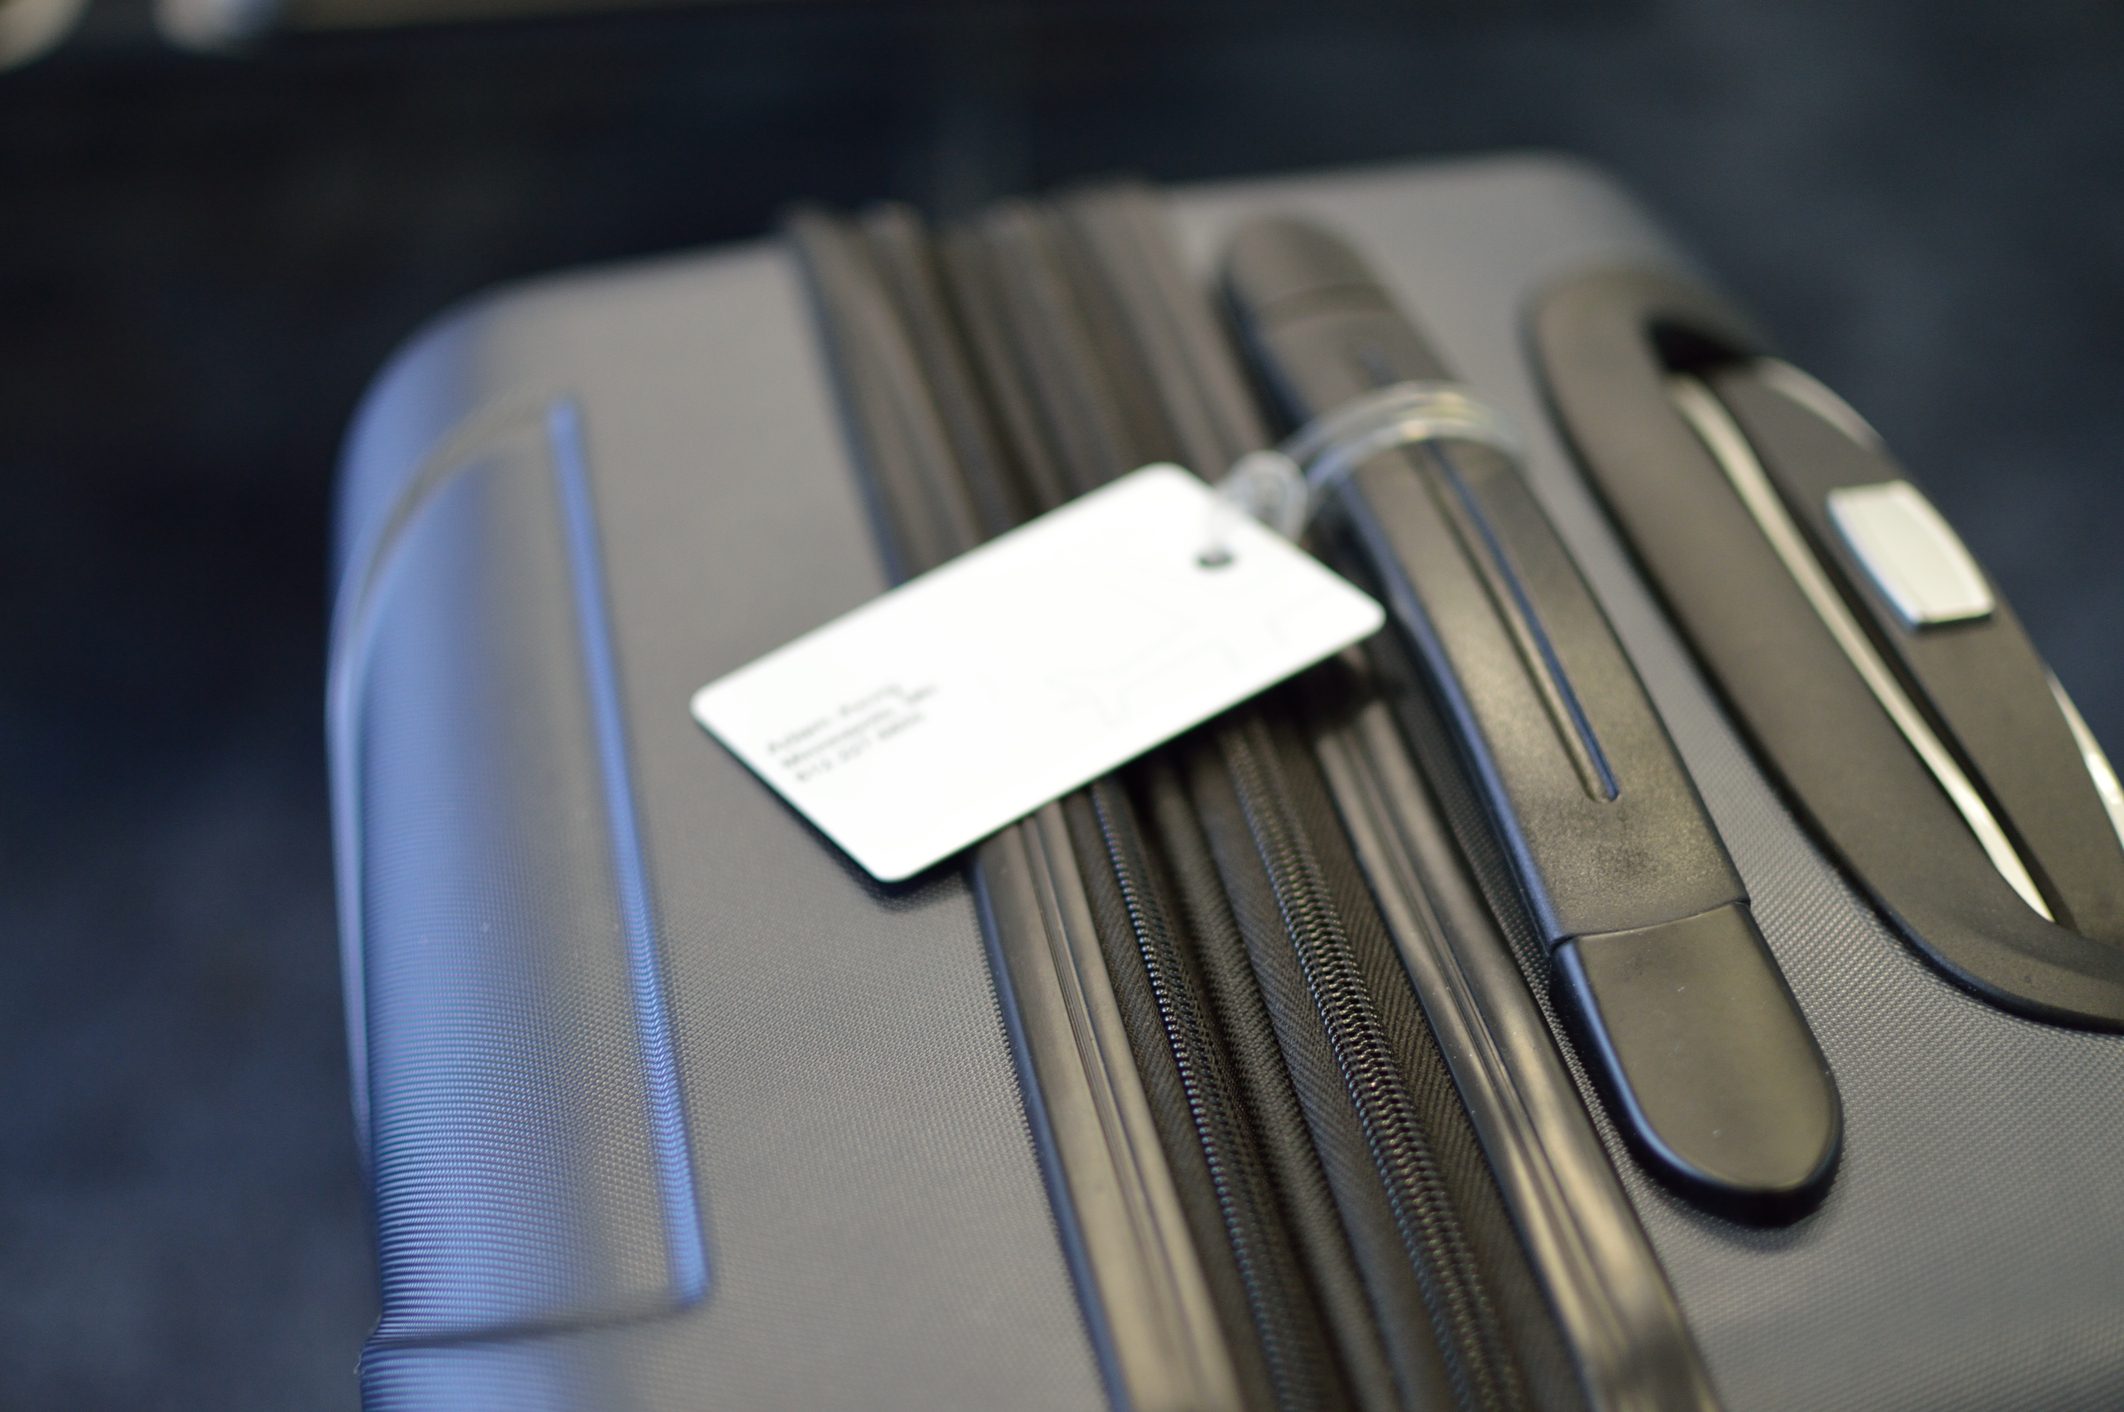 Airport Suitcase with luggage tag